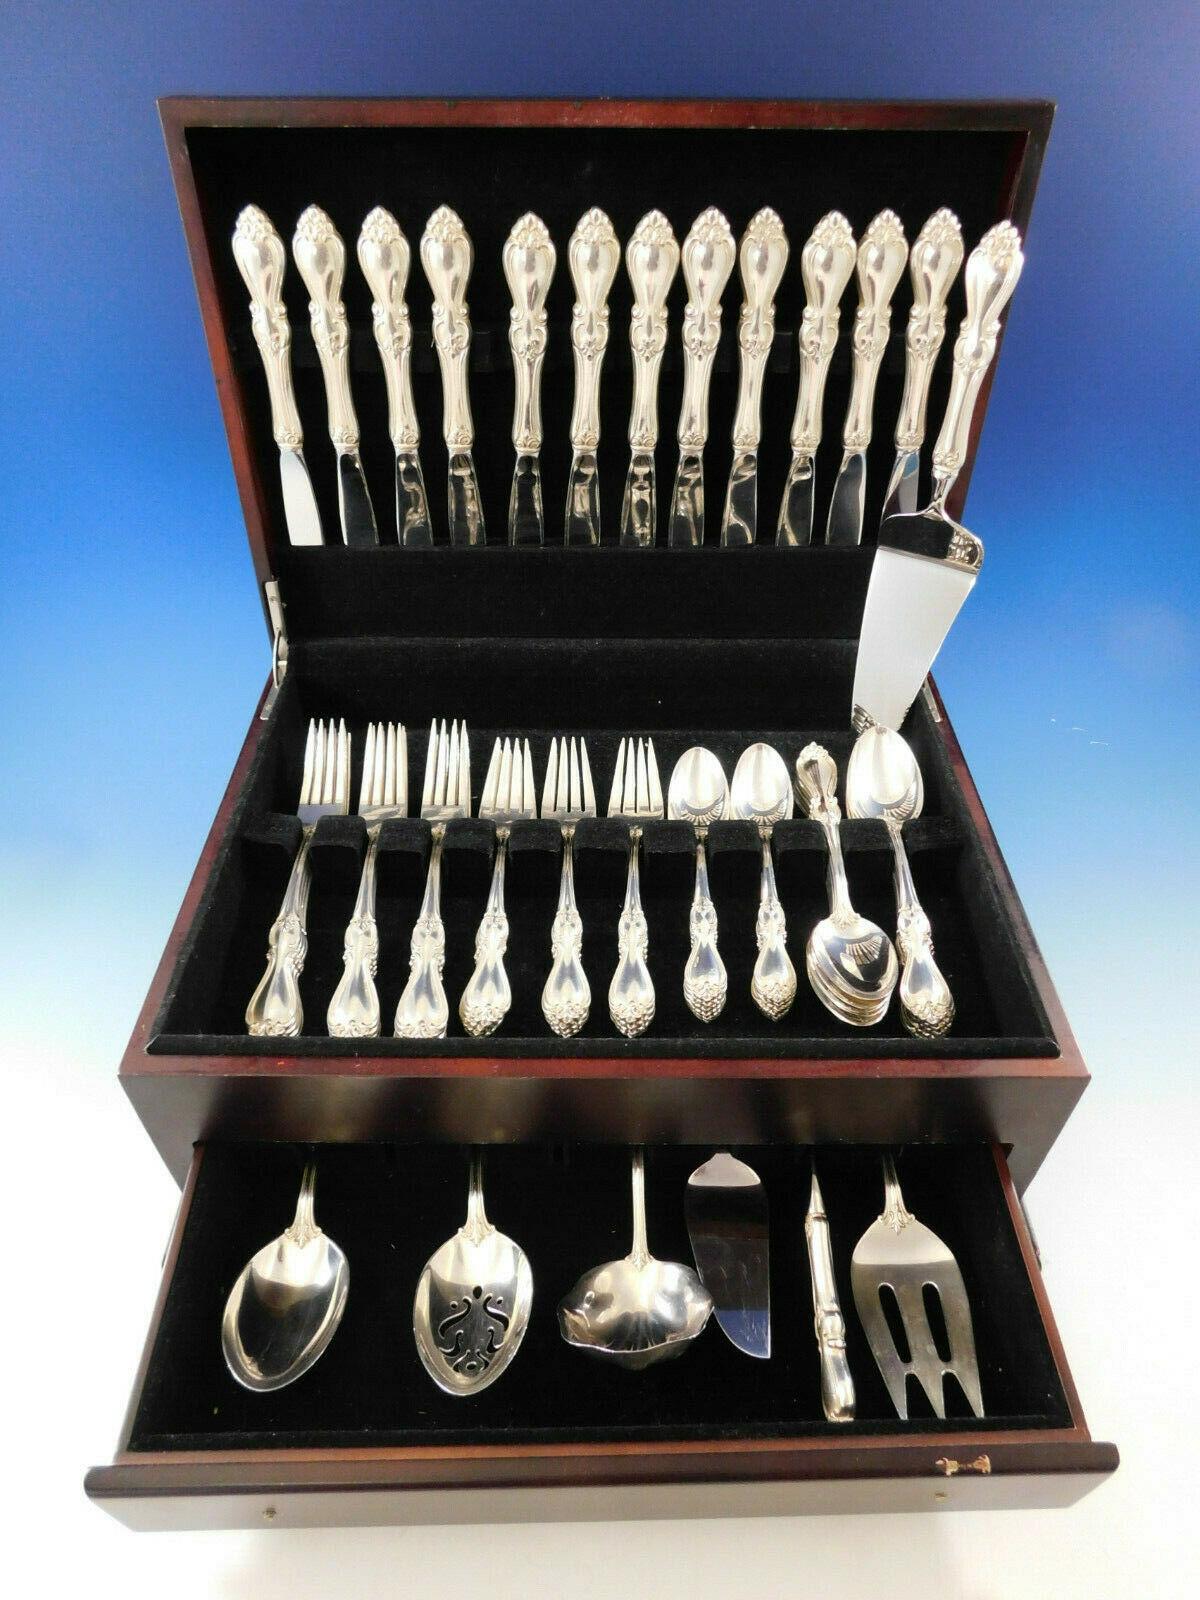 Queen Elizabeth I by Towle sterling silver flatware set - 67 pieces. This set includes:

12 knives, 9